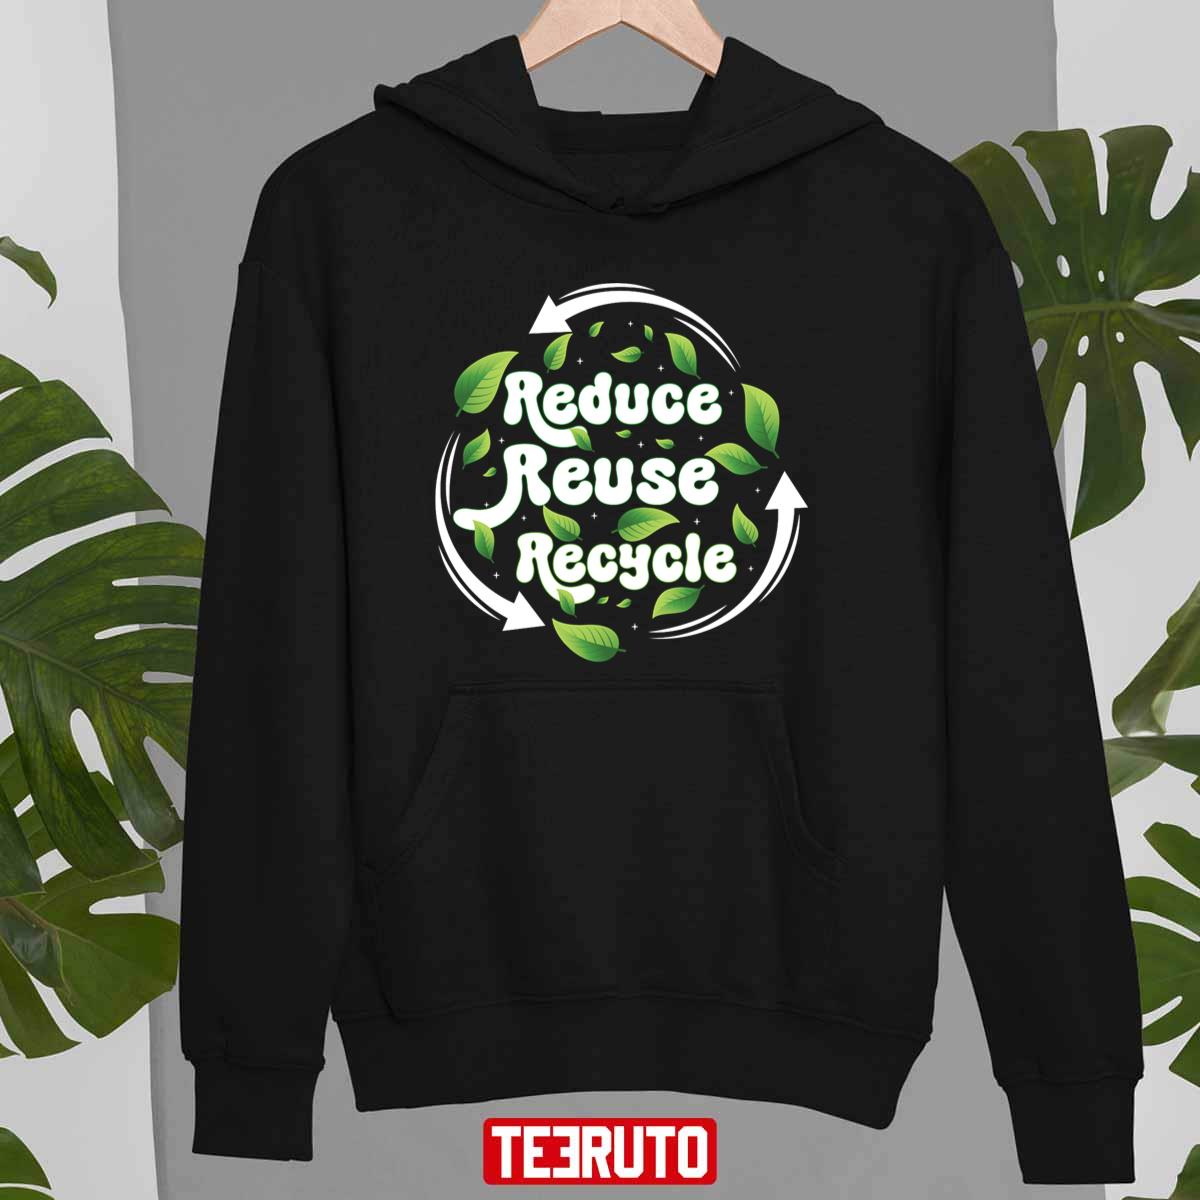 Reduce Reuse Recycle Earth Day Save Earth Unisex T-shirt